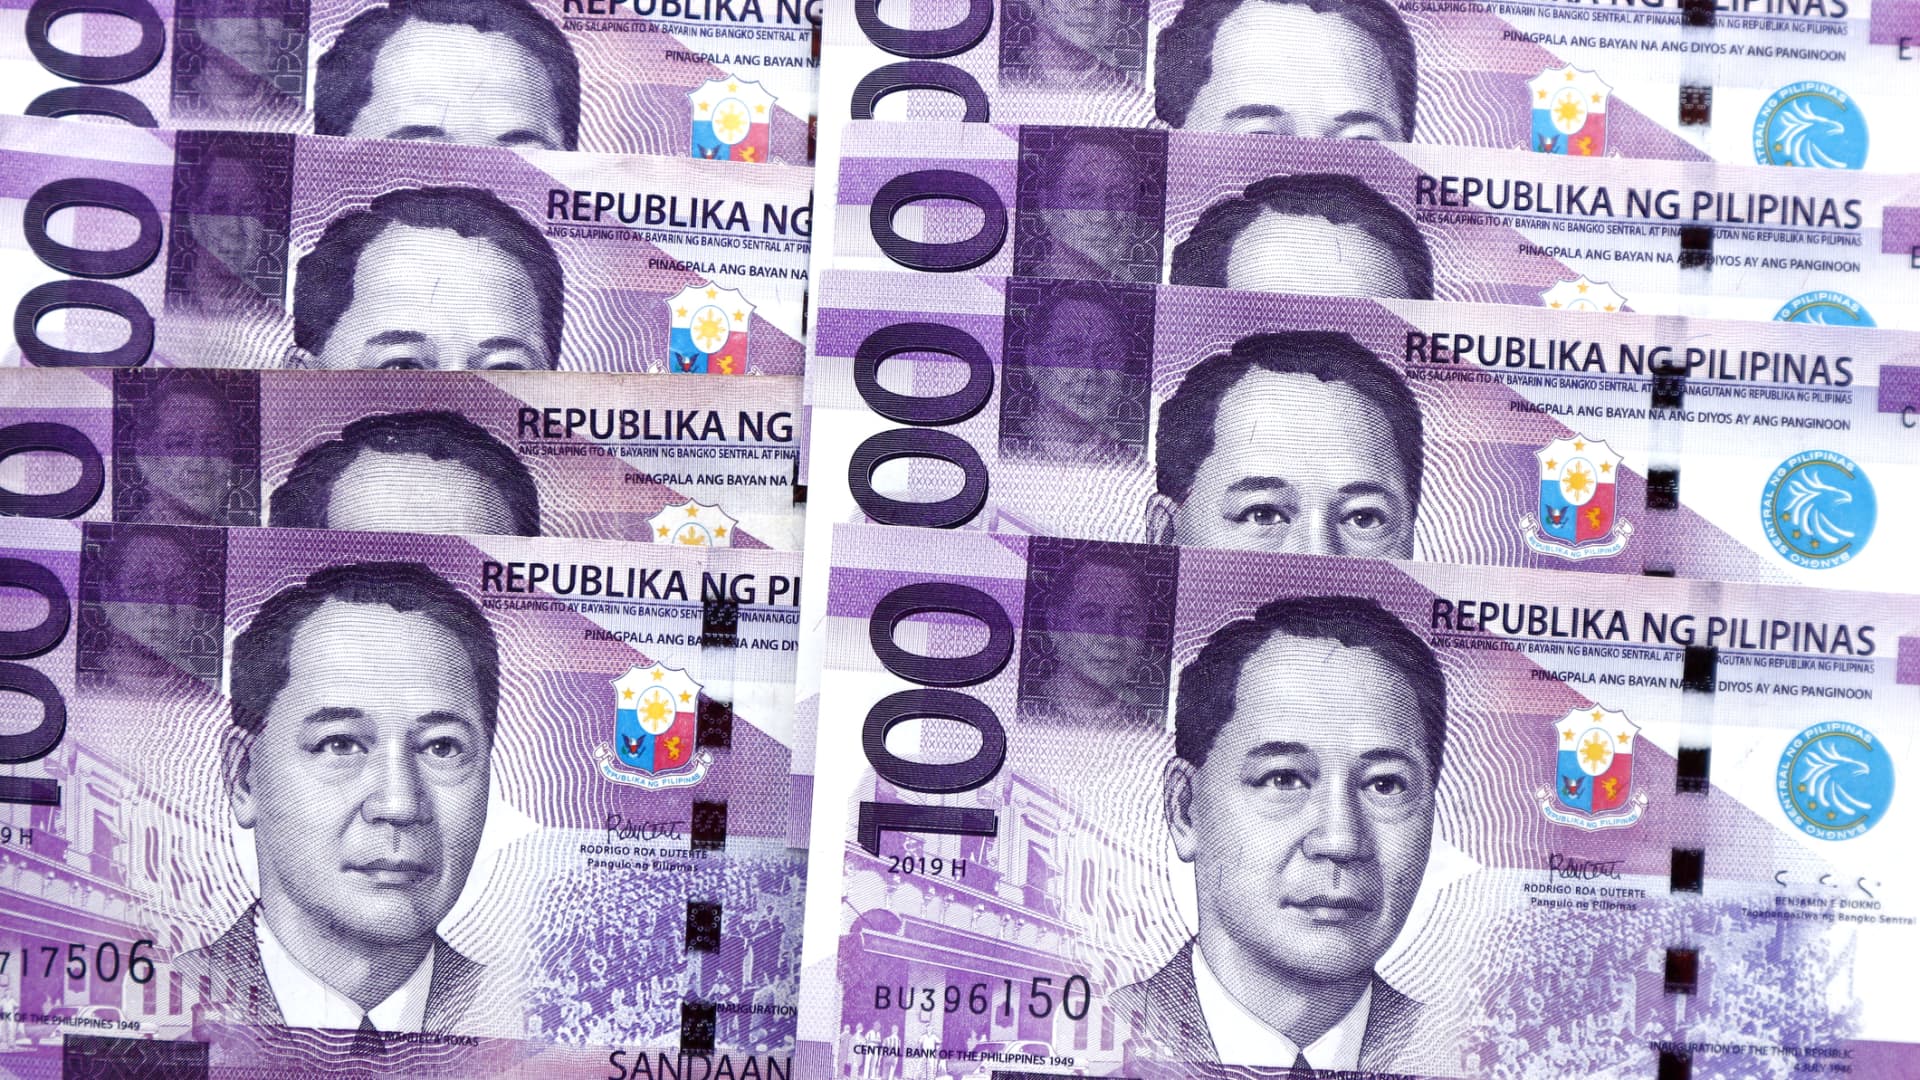 The Philippines faces drive to hike charges as peso weakens, inflation persists, economist says